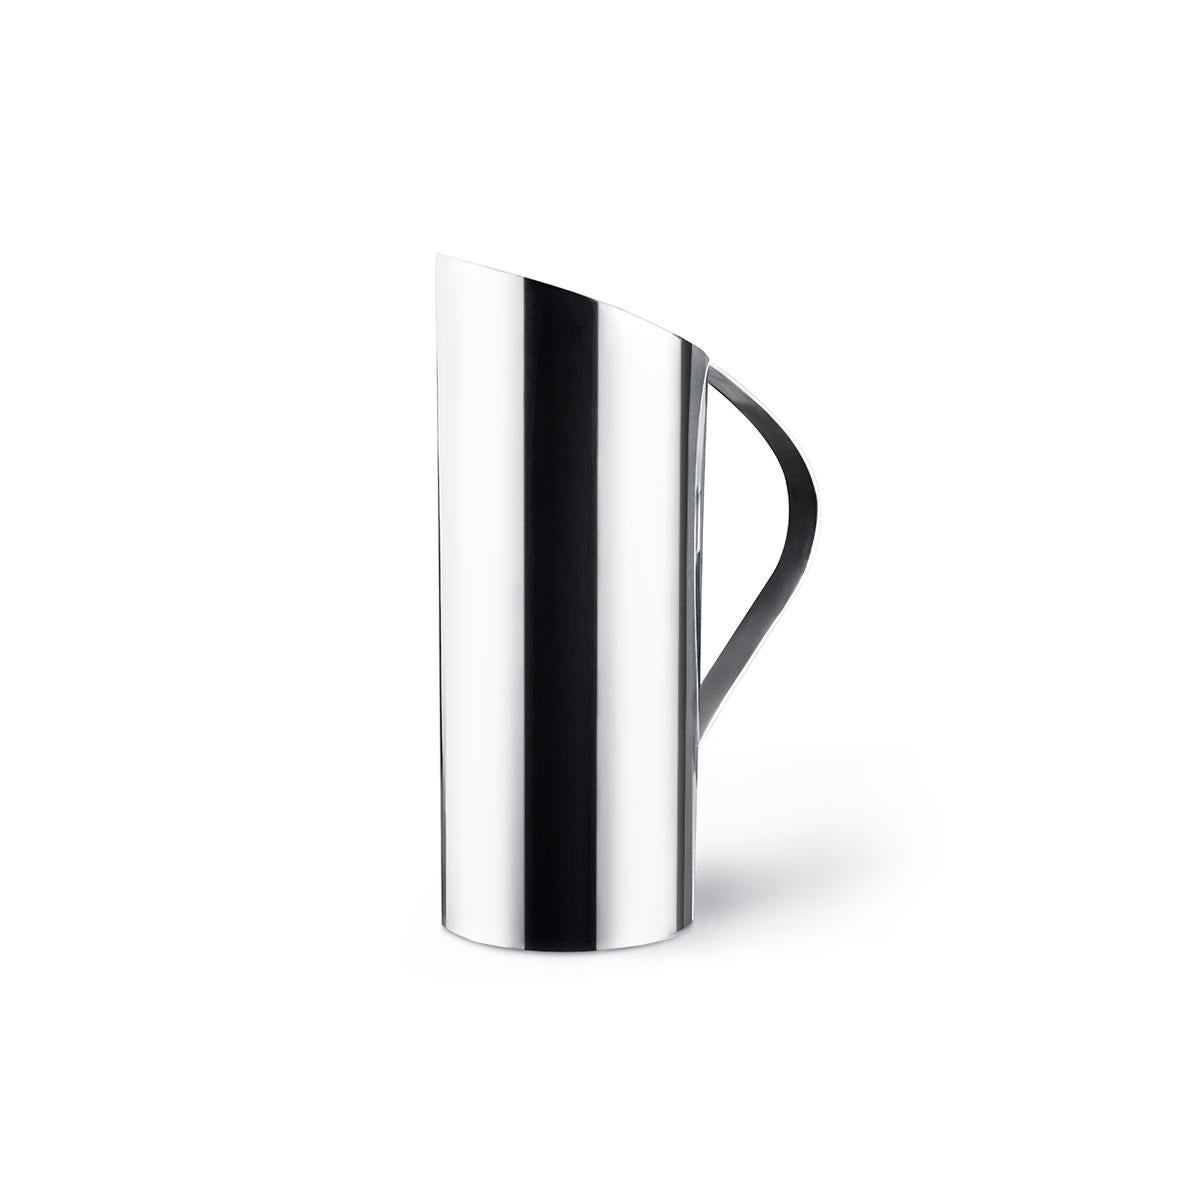 Afroditi is a silver plated carafe designed by Afroditi Krassa. The silver finishing plays with the light of the room that emphasizes the elegant curves and the timeless silhouette.
Afroditi is also available with a nikel-plated finishing.